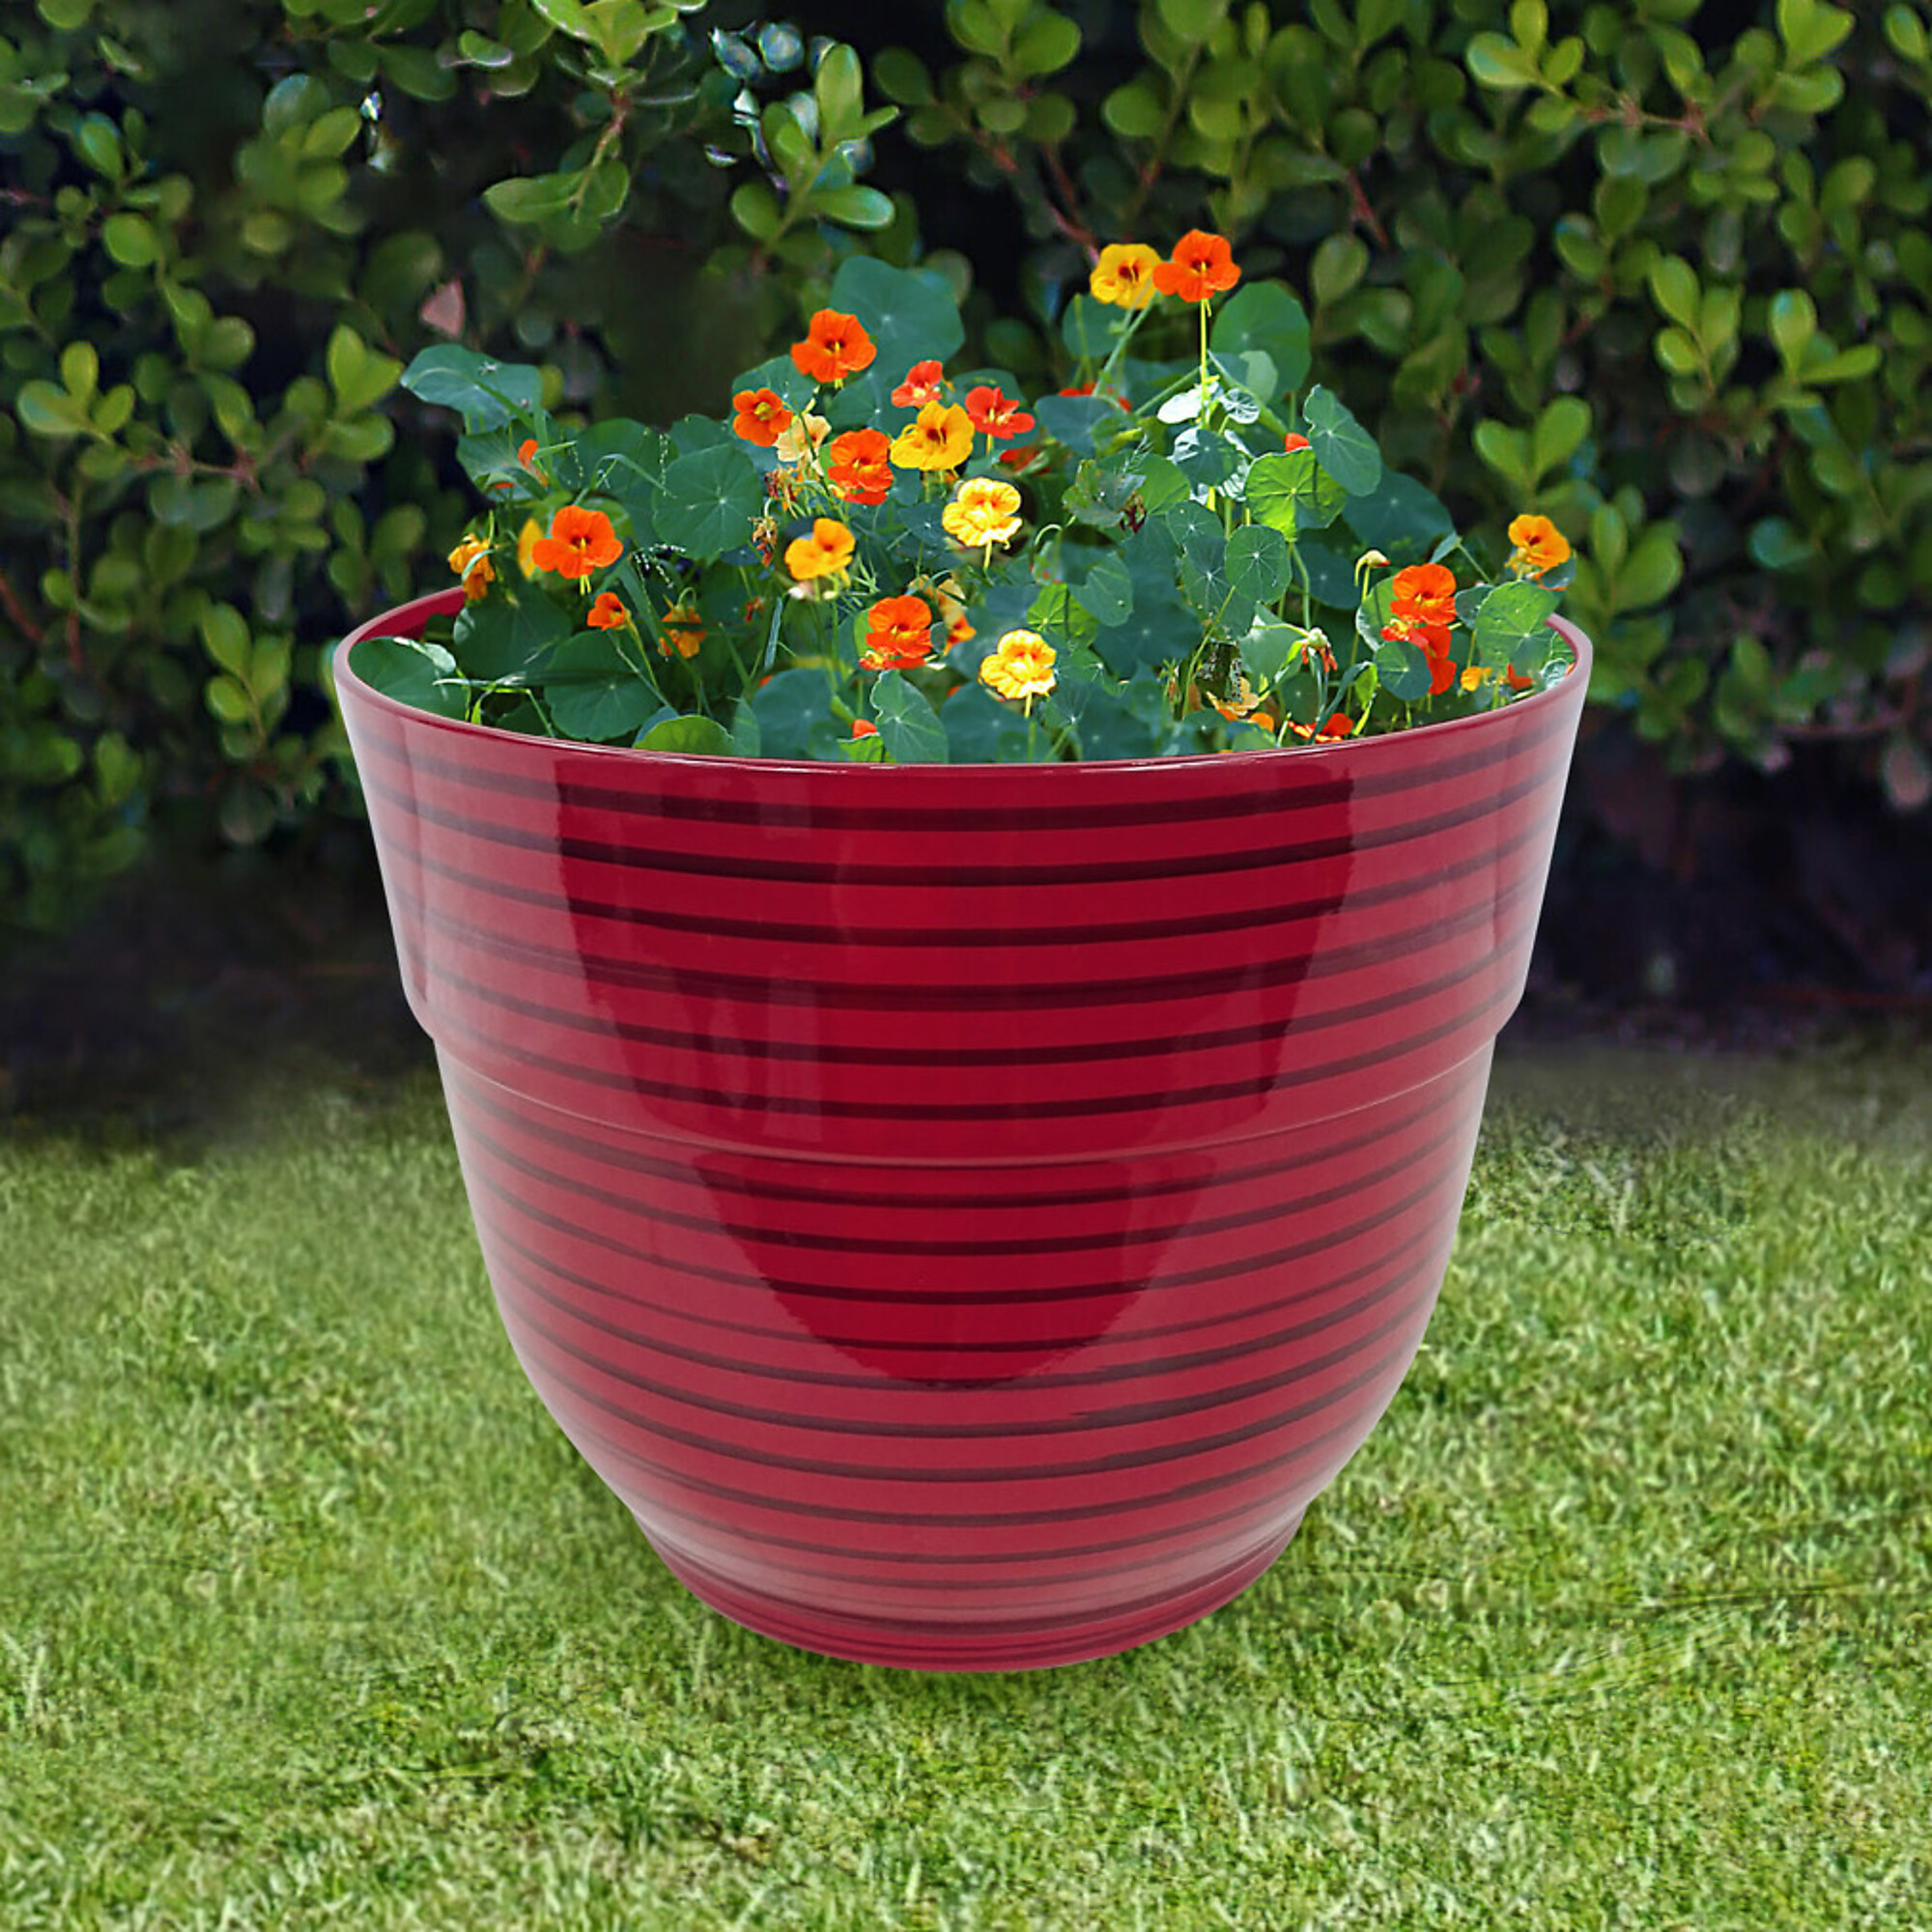 Alpine Corporation, Red Glossy Striped Planter with Drainage Hole, Container Length 13 in, Container Width 13 in, Material Polypropylene, Model